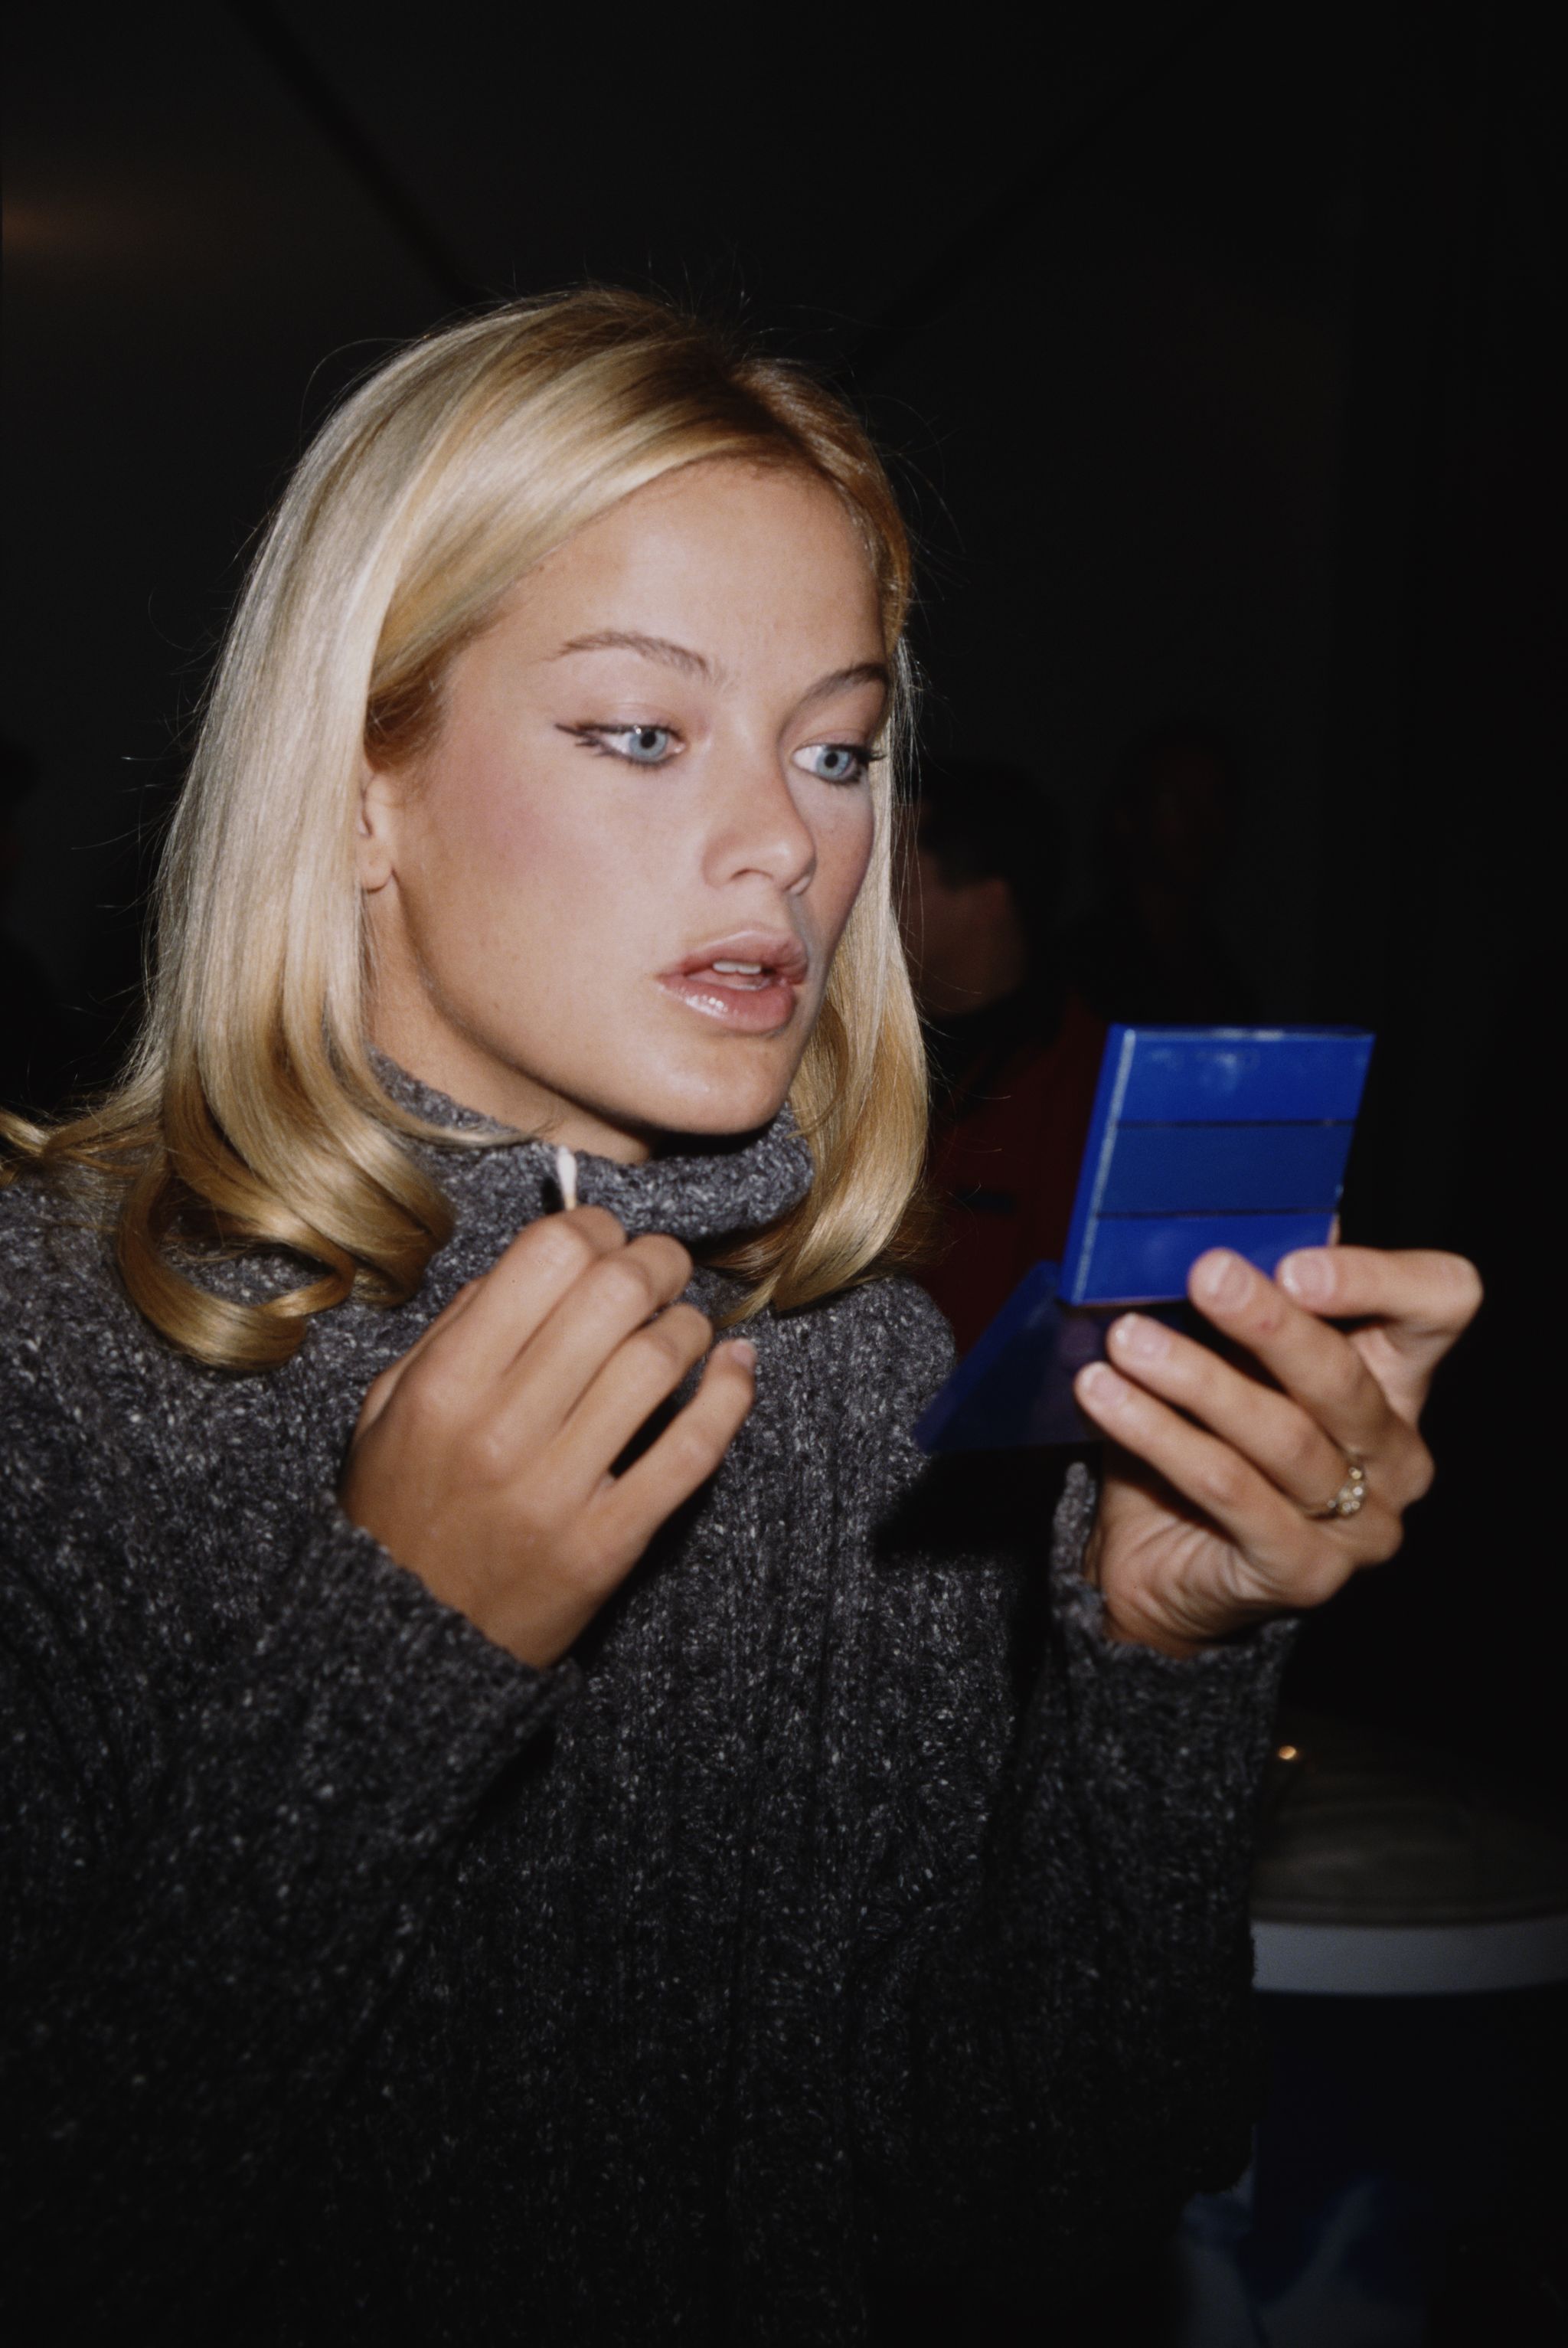 american model and actress carolyn murphy attends the oscar de la renta fall 1999 fashion show, 1999  photo by rose hartmanarchive photosgetty images